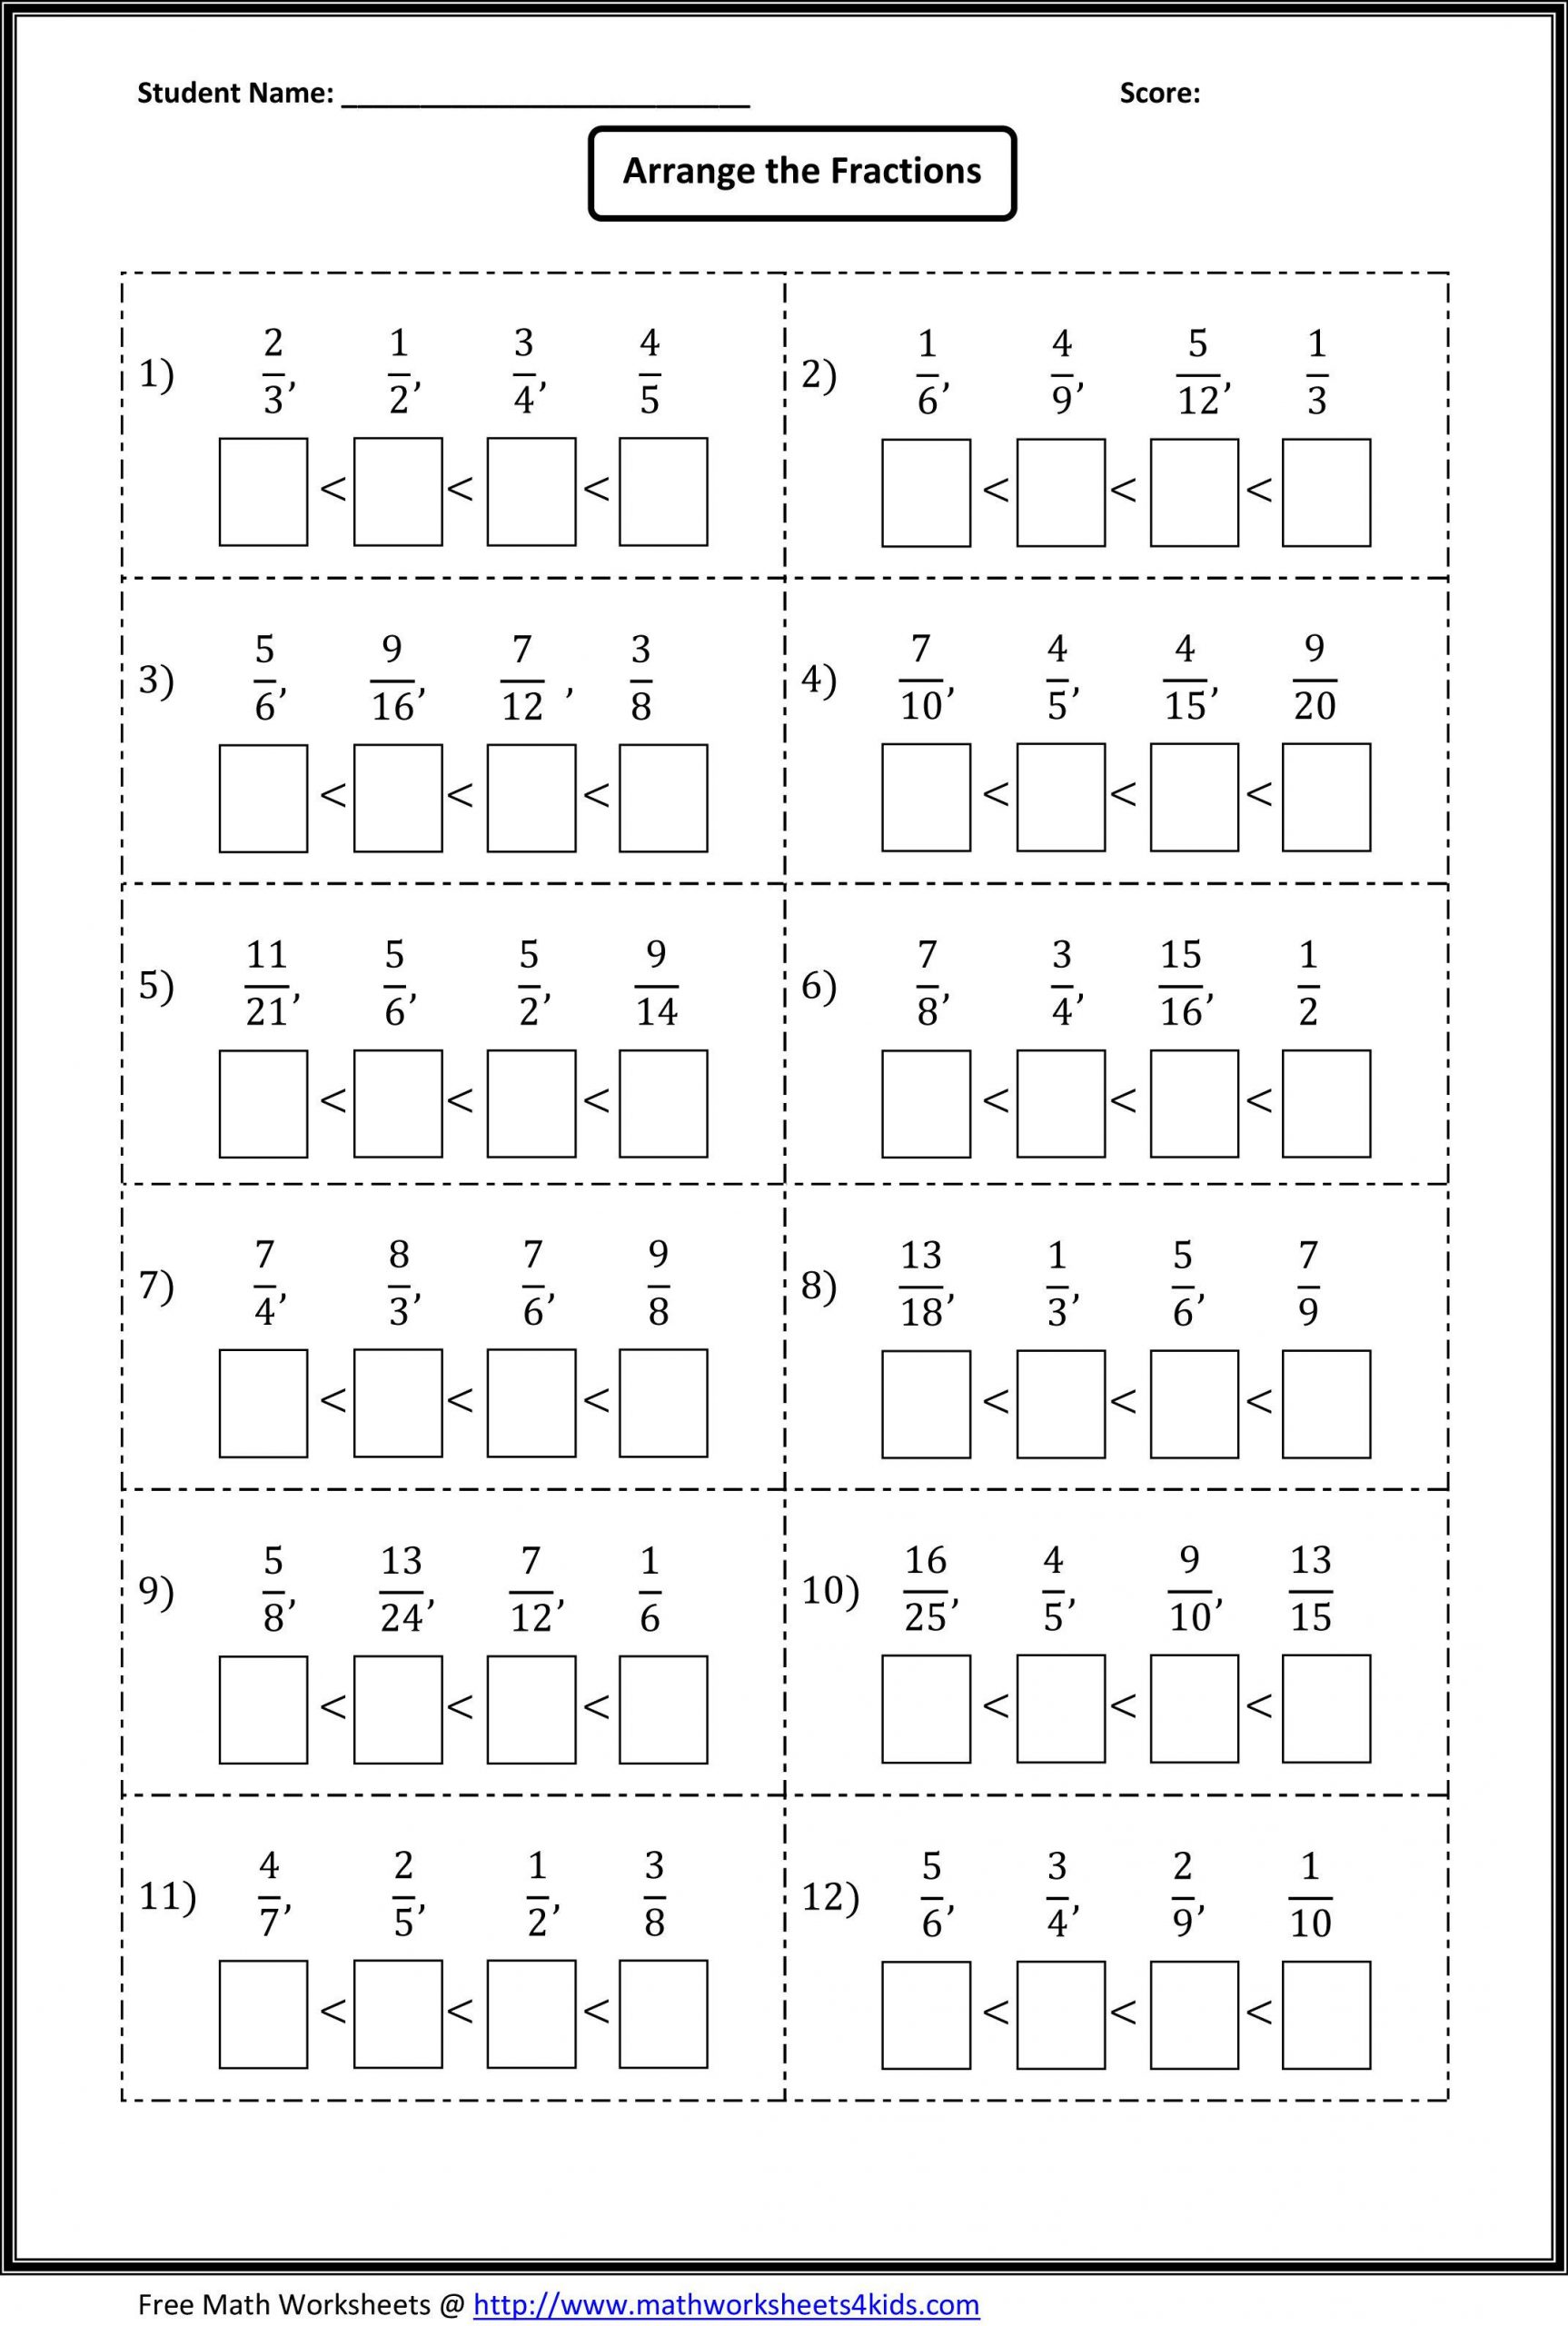 Ordering Fractions and Decimals Worksheet ordering Fractions Worksheets